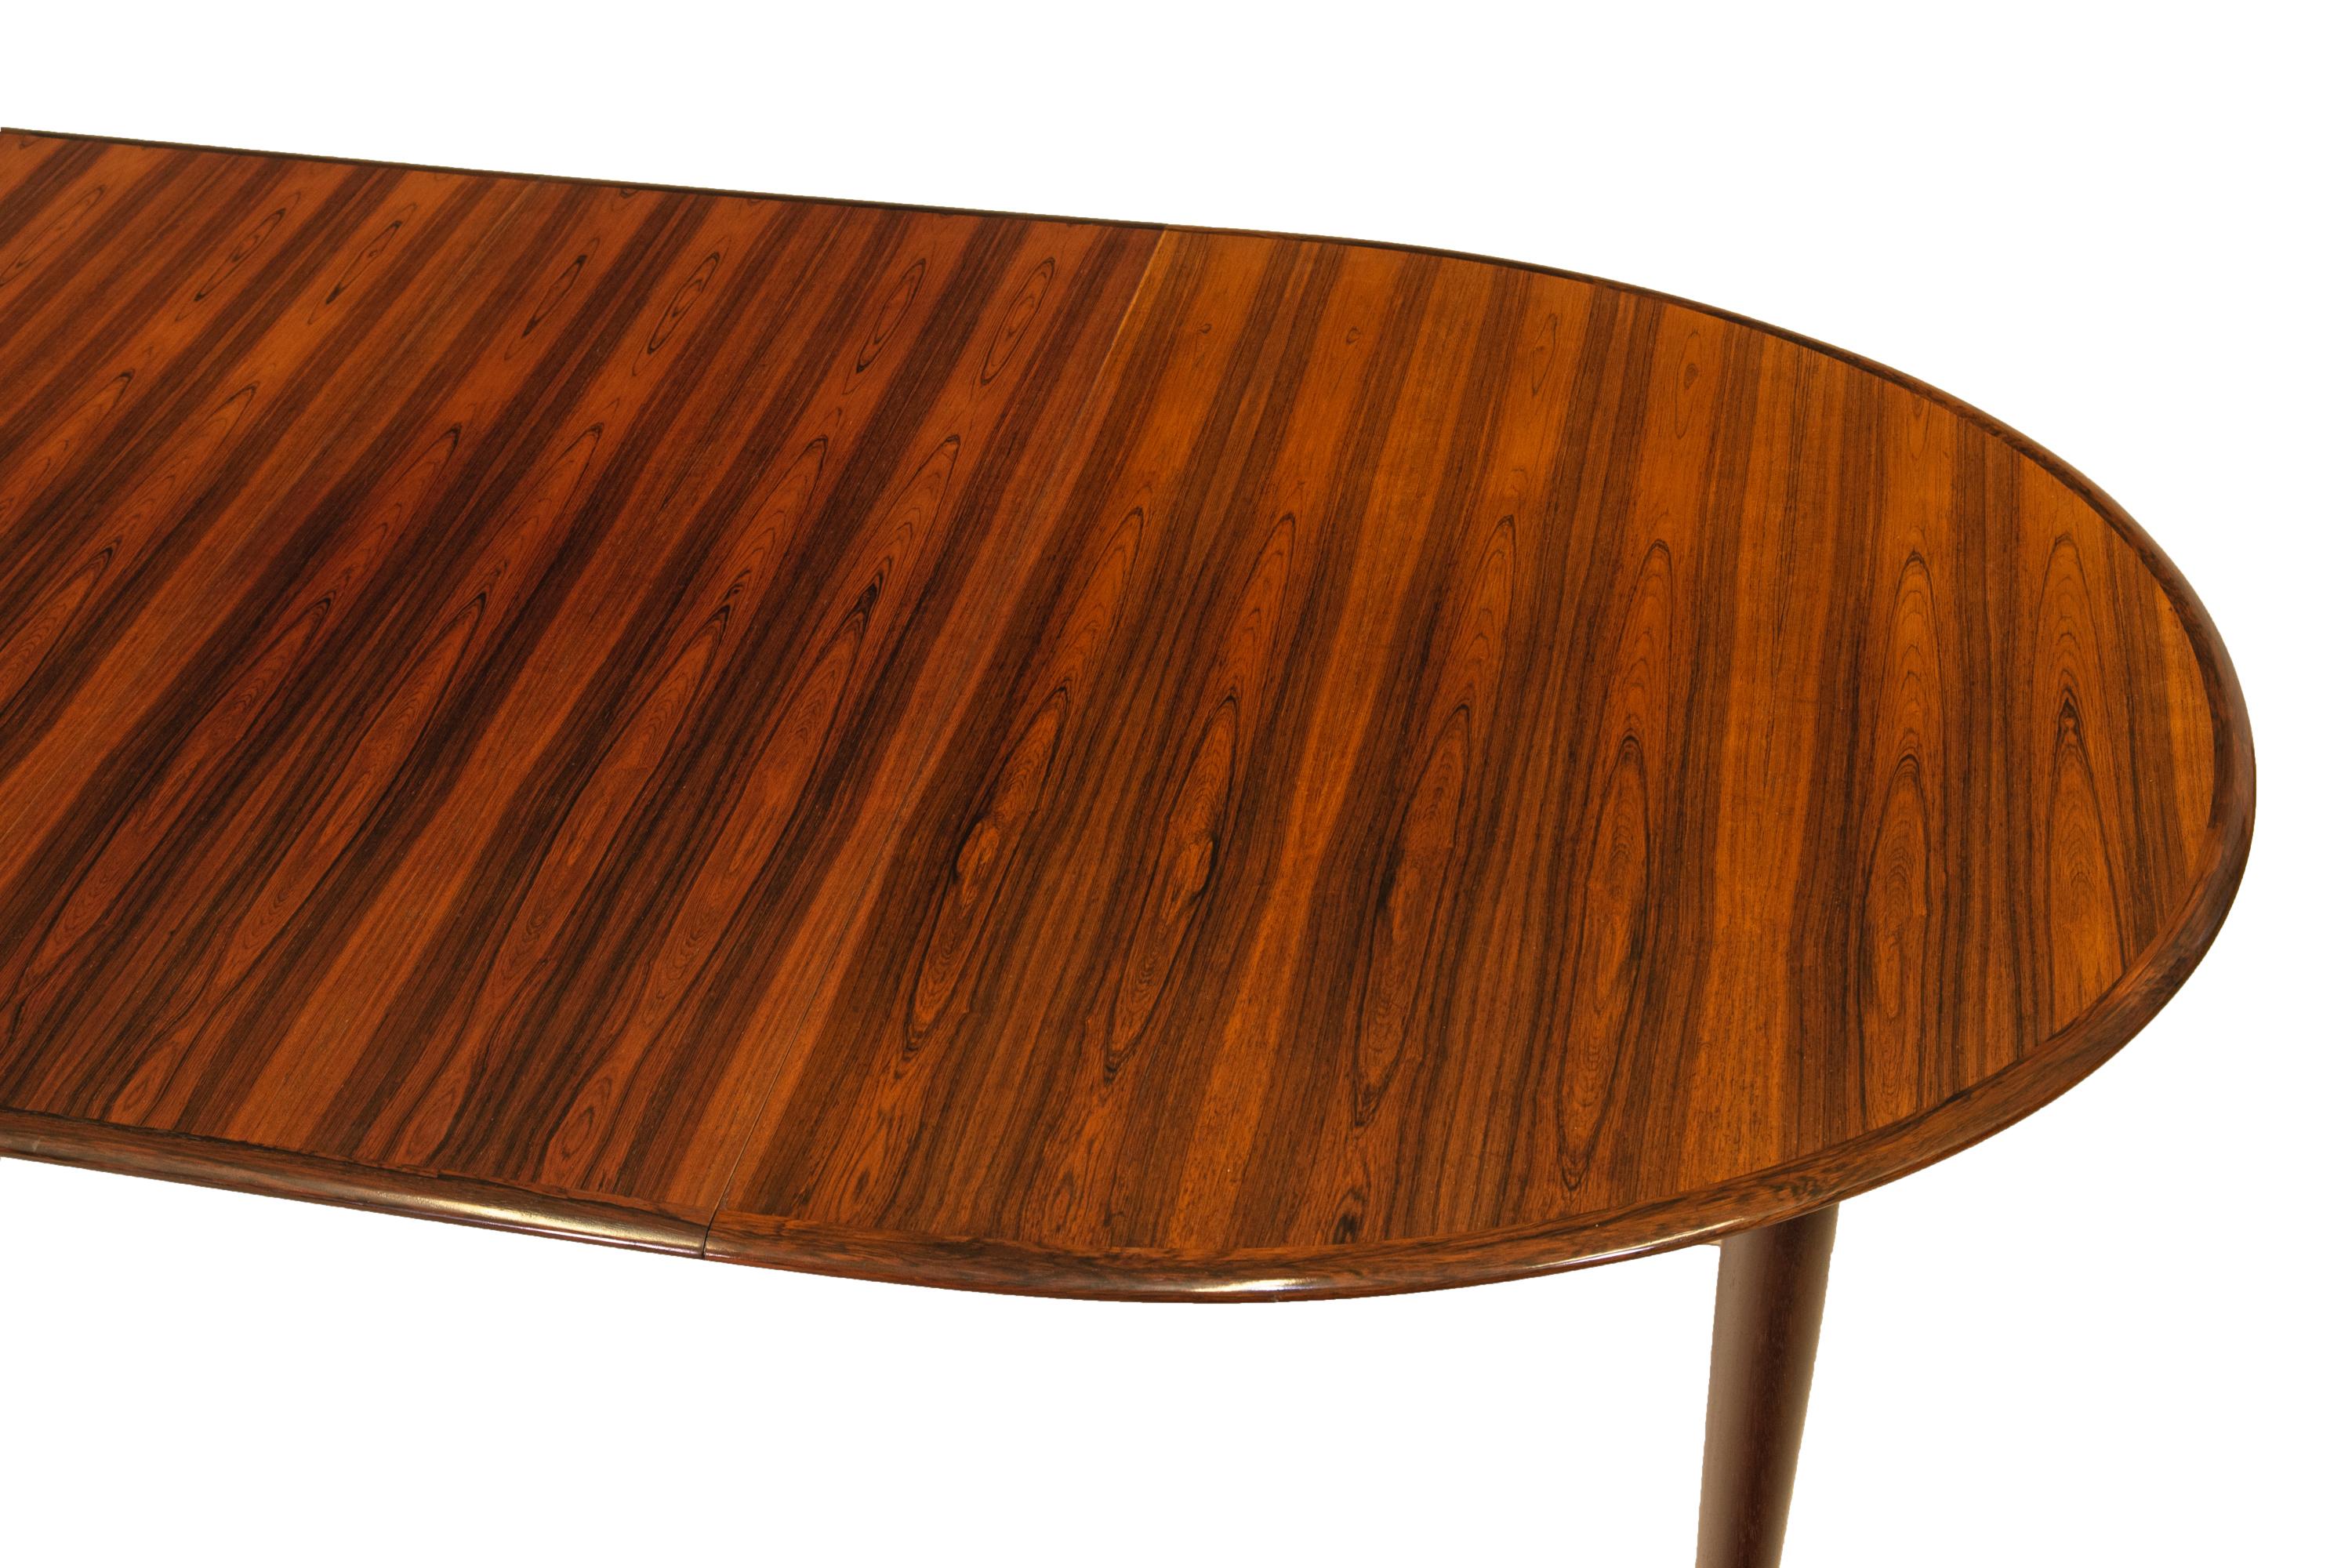 20th Century Danish Rosewood Extending Dining Table By Skovmand & Andersen 1960s For Sale